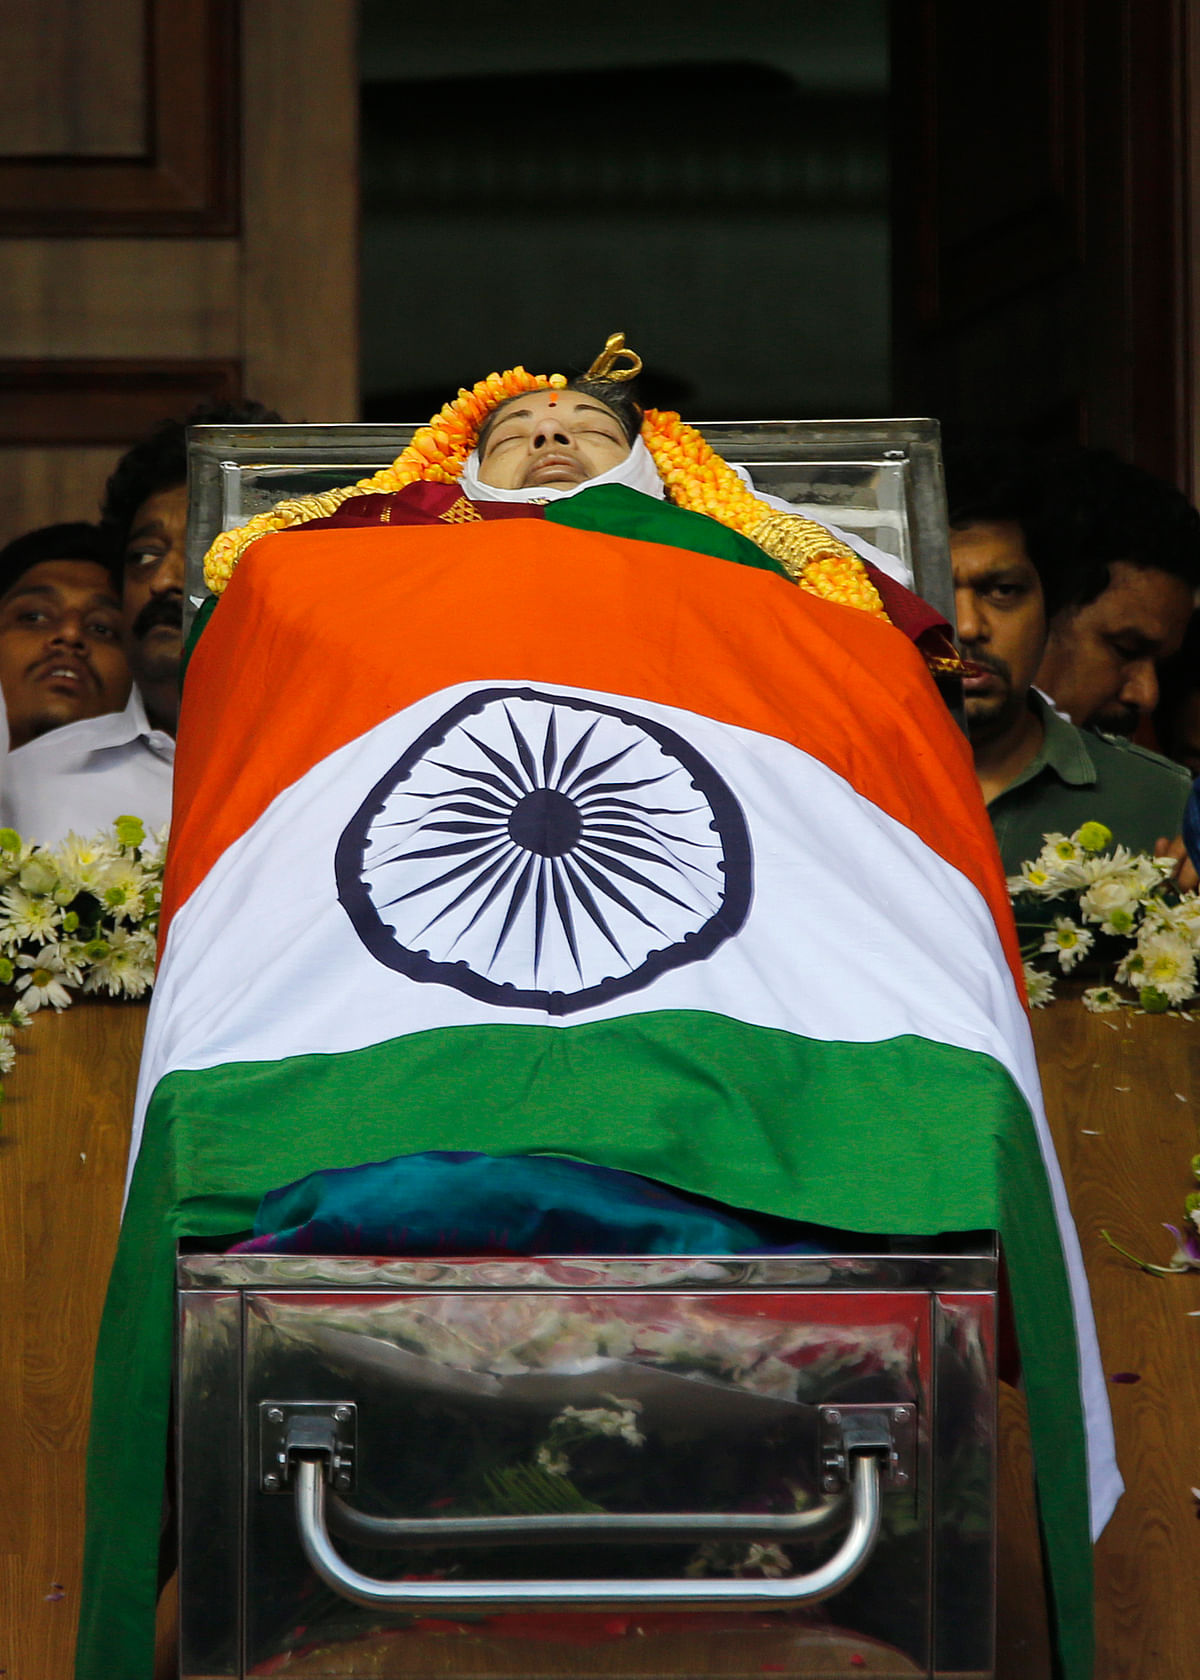 Jayalalithaa declared her political intent during MGR’s funeral at Rajaji Hall, by placing herself at his head.